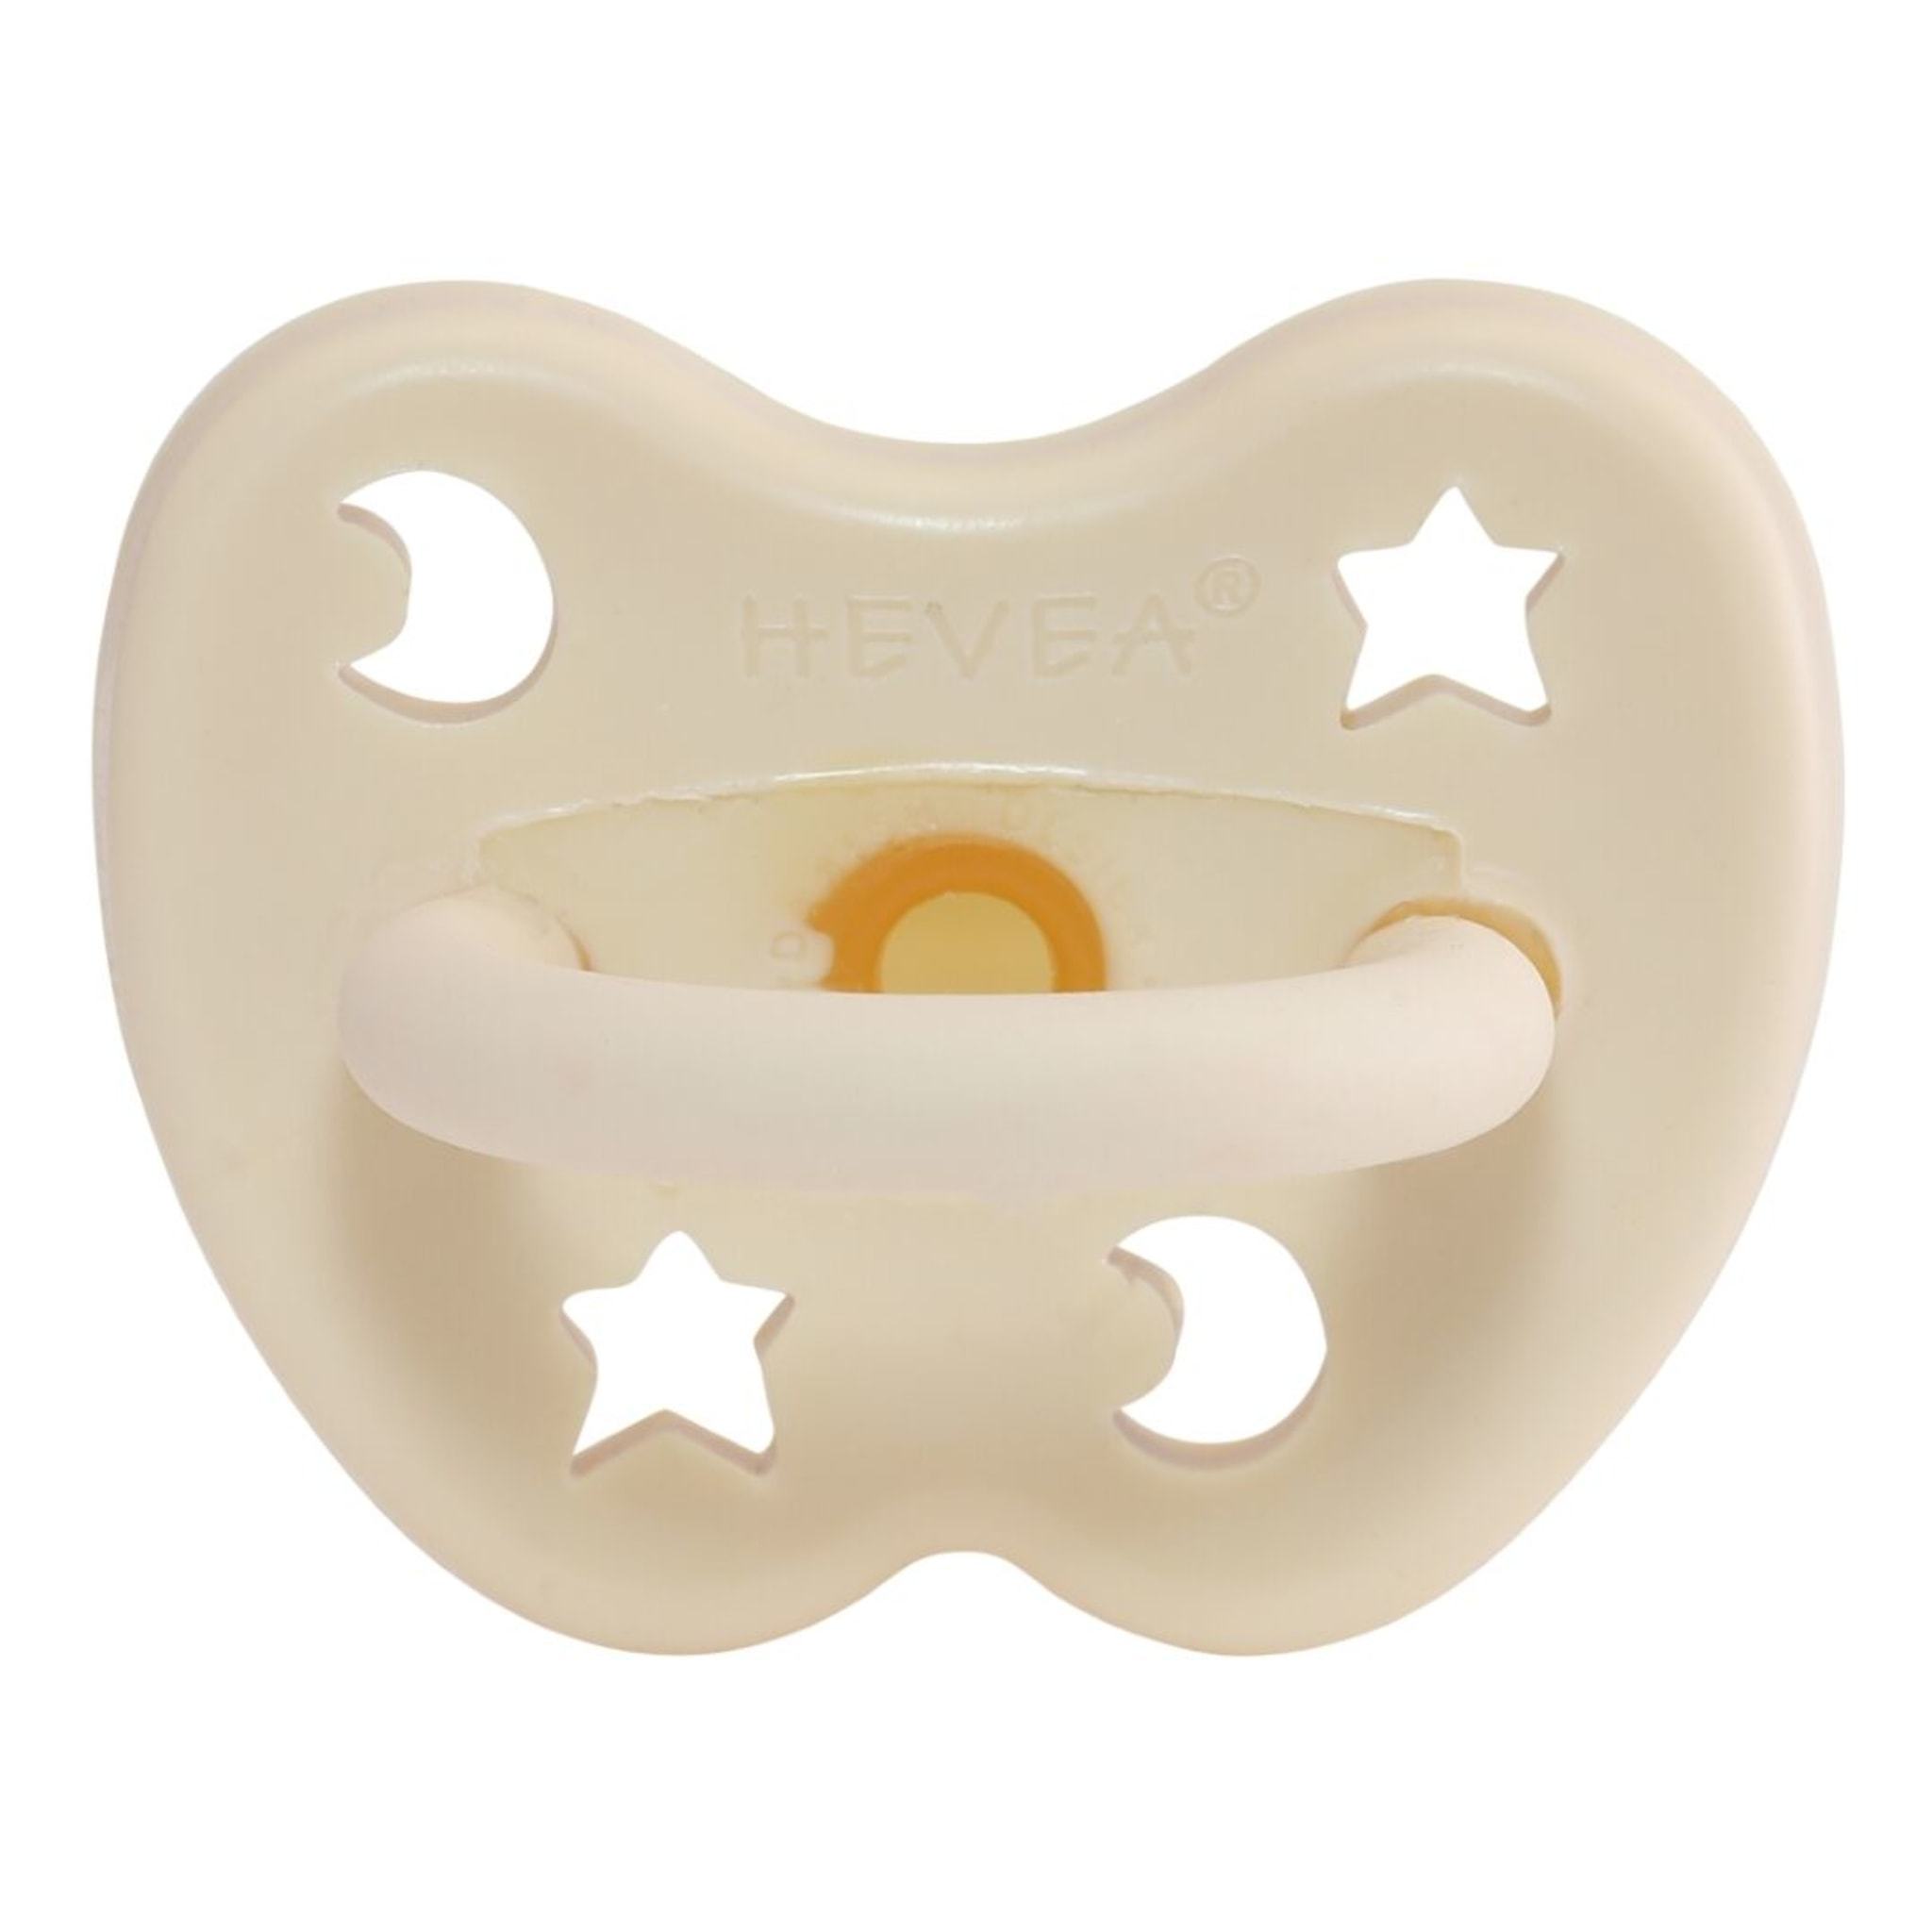 Hevea Coloured Natural Rubber Pacifier - 3-36 MONTHS - ROUND TEAT